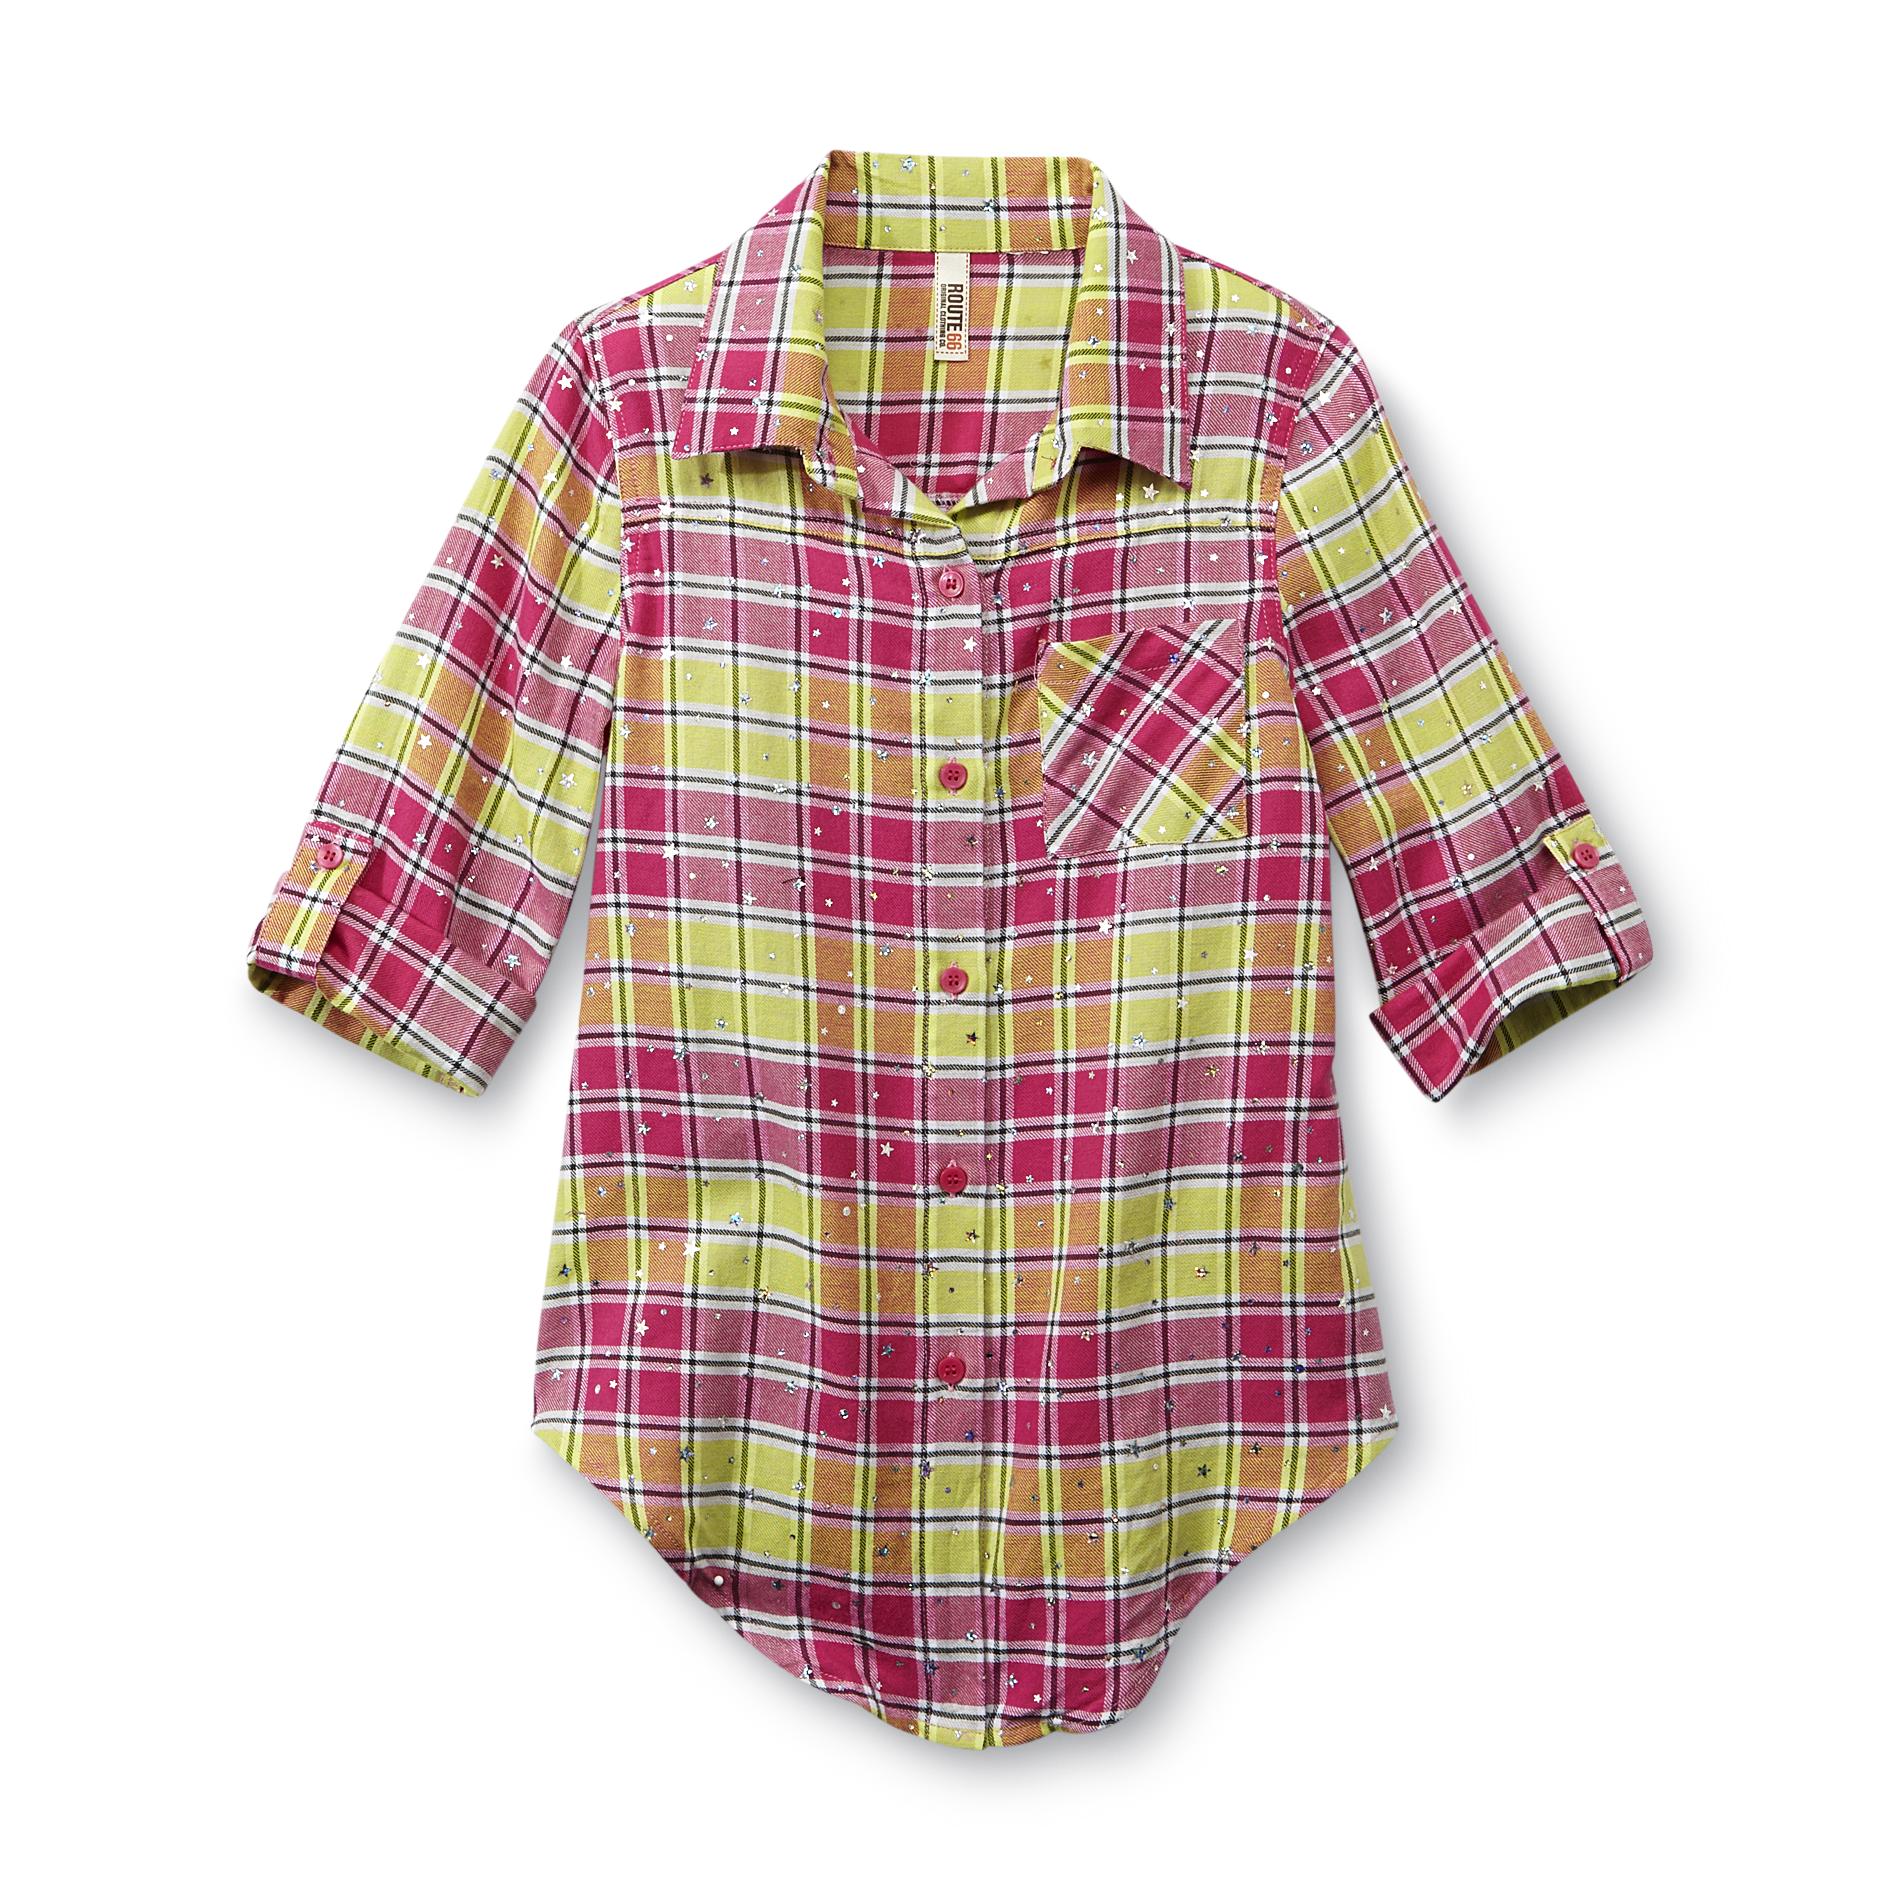 Route 66 Girl's High-Low Flannel Shirt - Plaid & Sparkle Stars